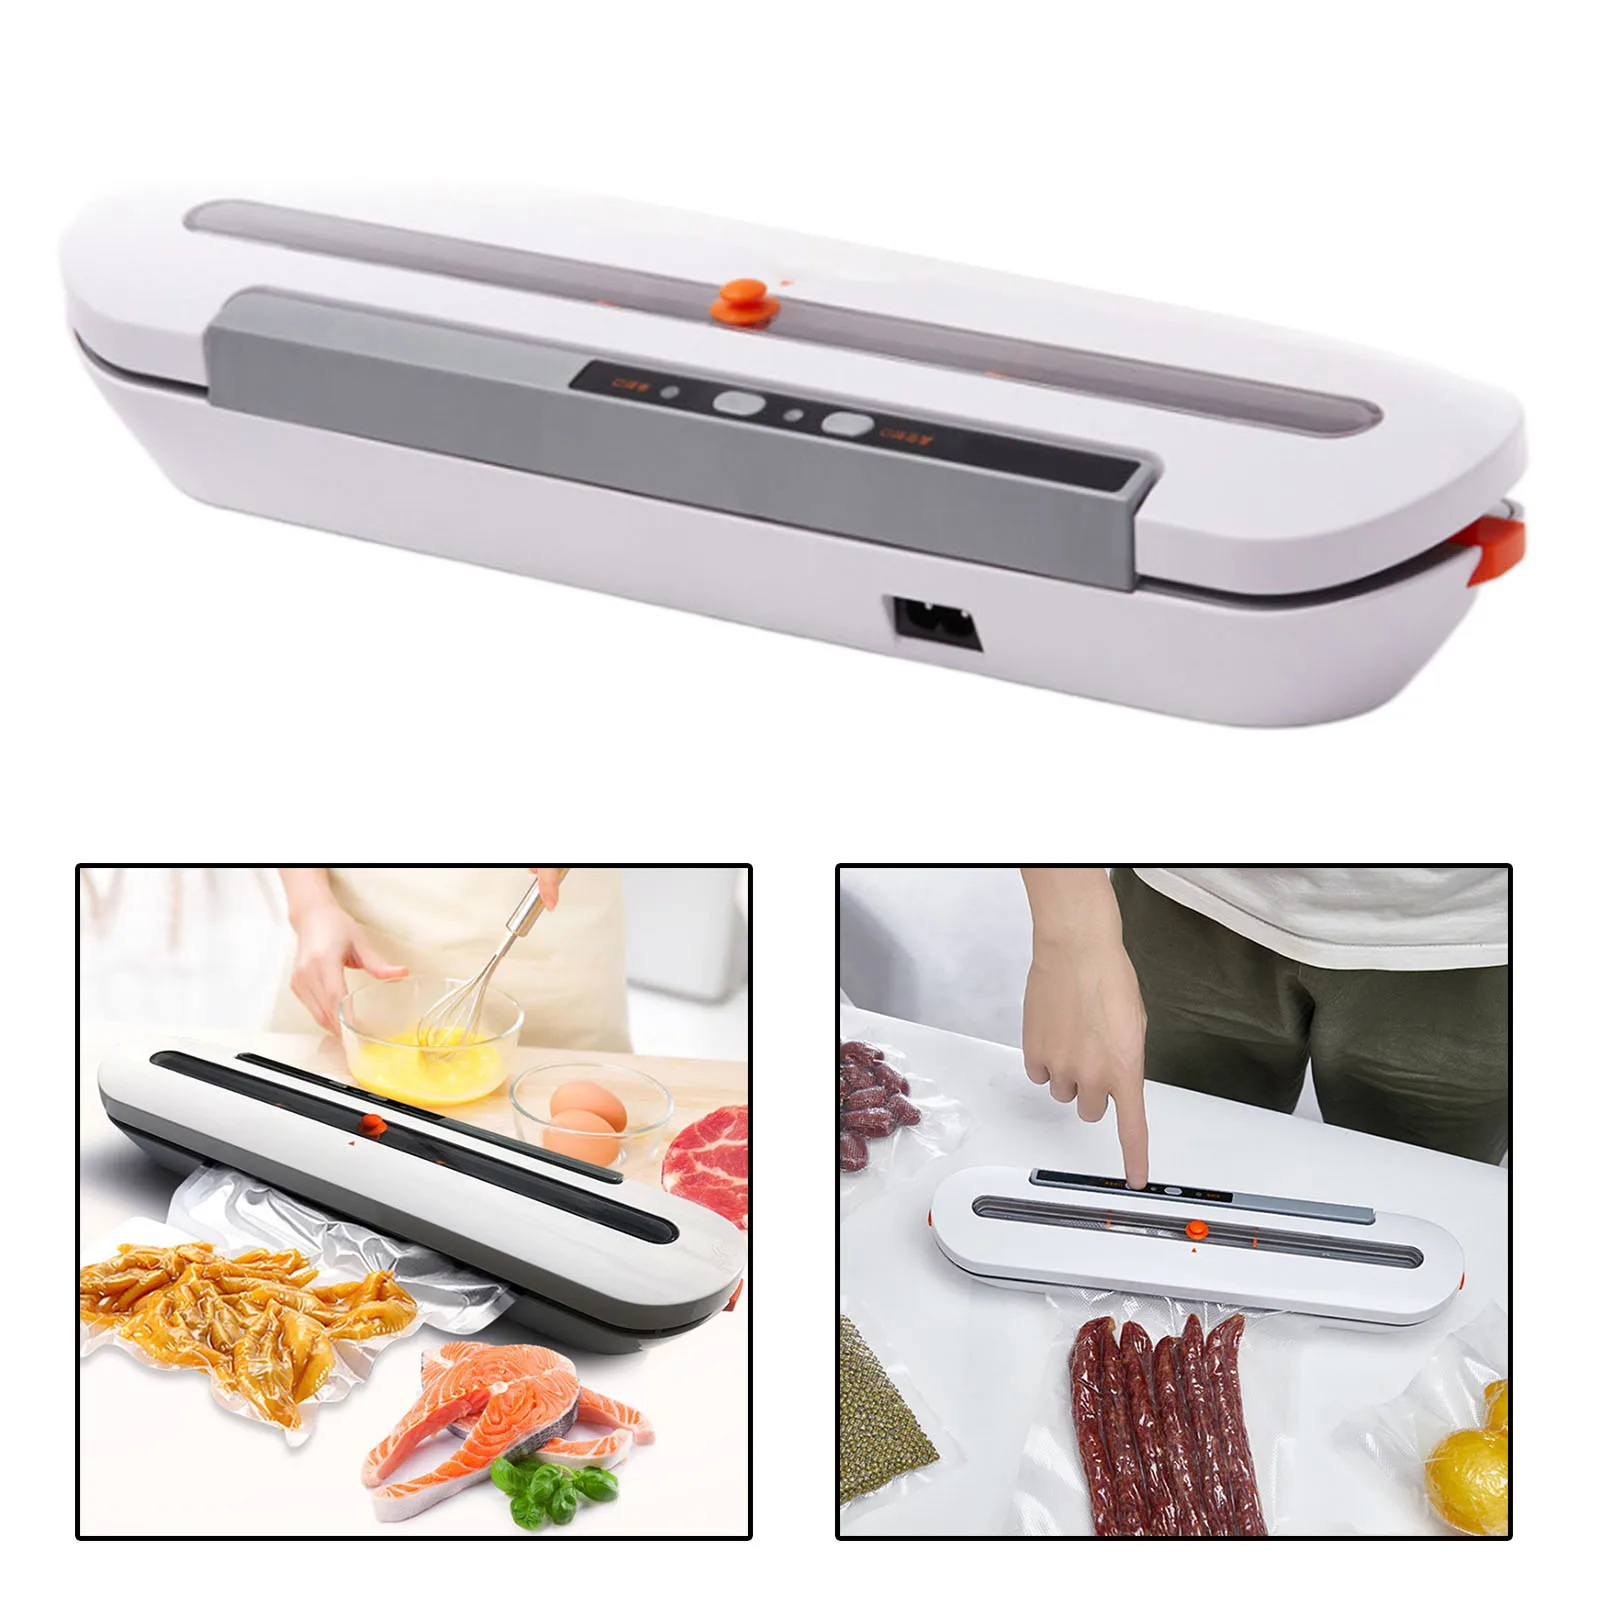 AU Plug Automatic Vacuum Sealer Machine Food Packaging for Vegetables,Meat,Eggs,Fruits with 10pcs Sealer Bags